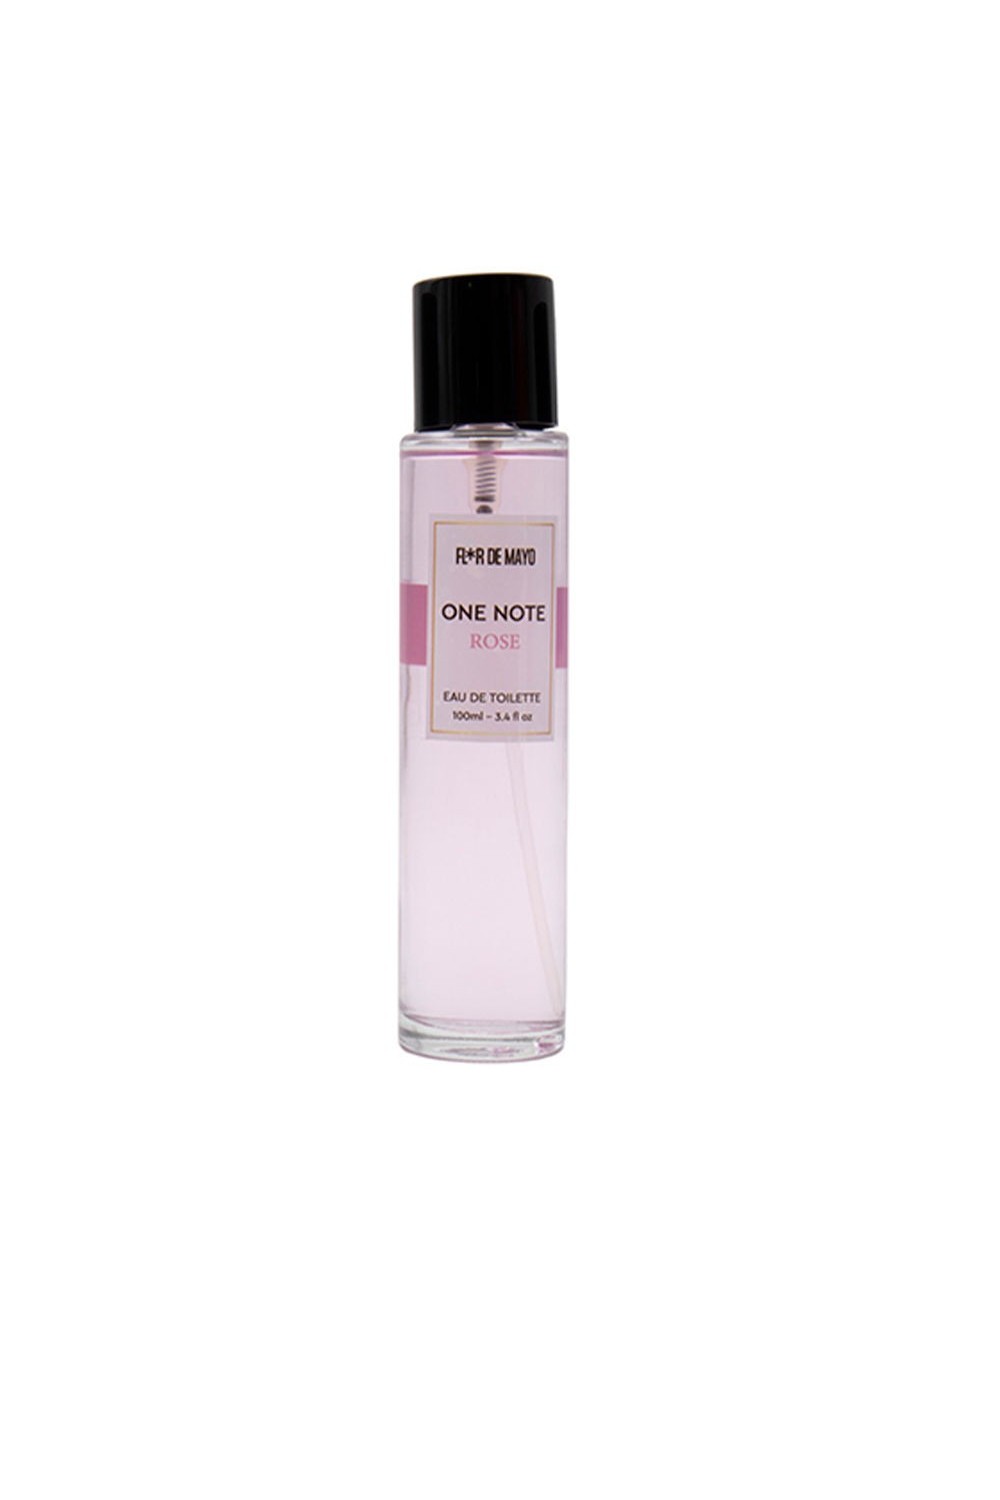 Flor De Mayo One Note Roses Edt Spray 100ml